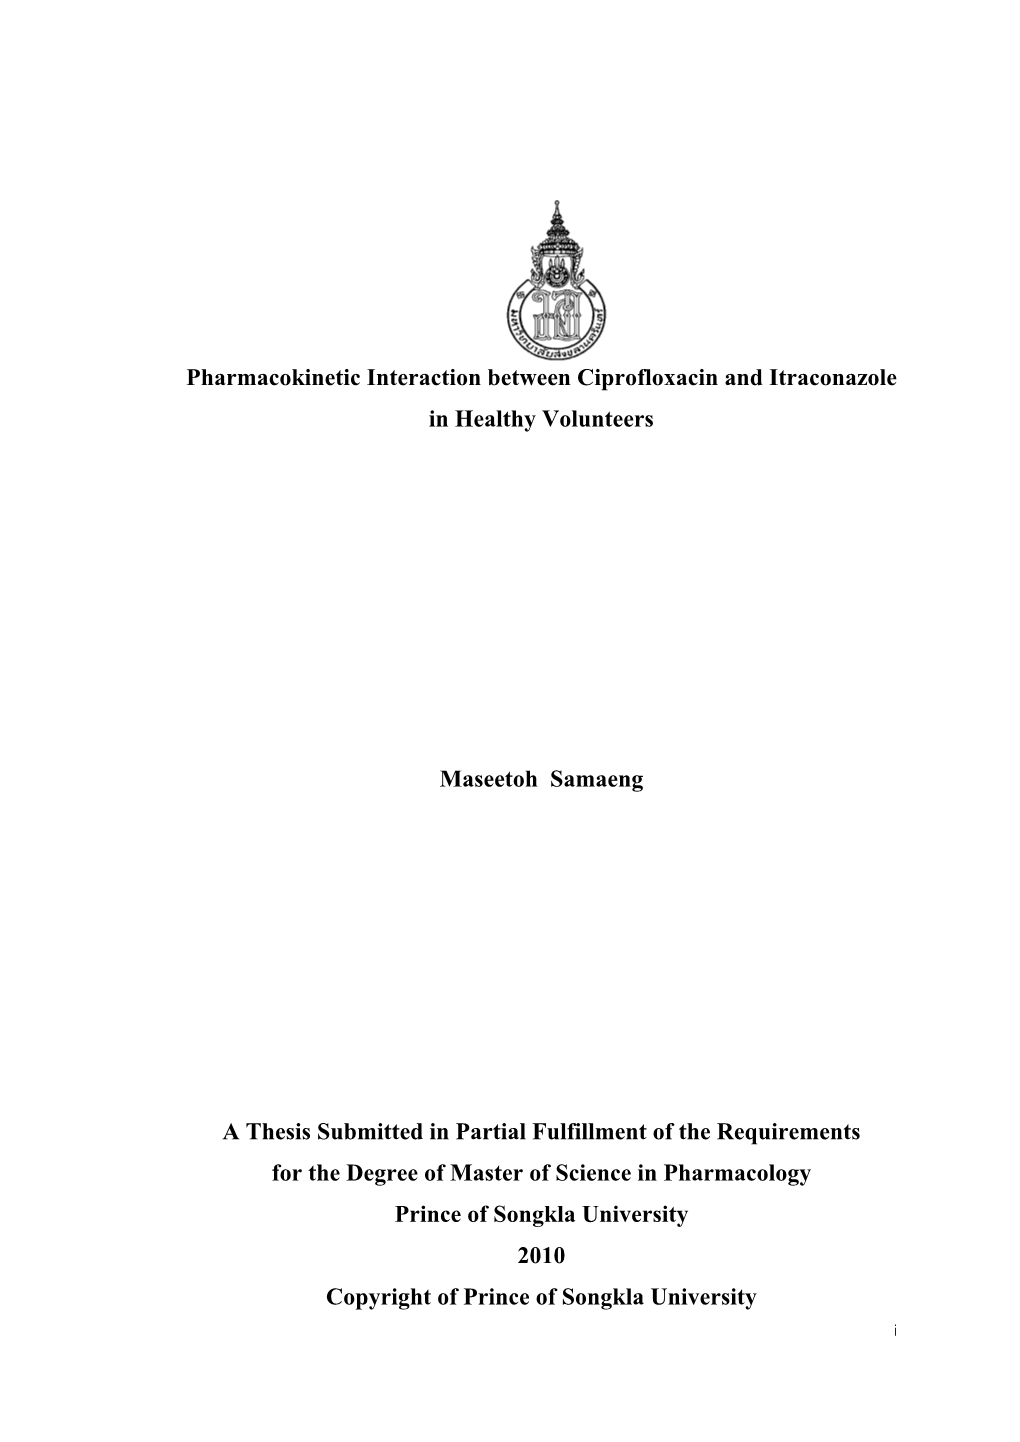 I Pharmacokinetic Interaction Between Ciprofloxacin and Itraconazole in Healthy Volunteers Maseetoh Samaeng a Thesis Submitted